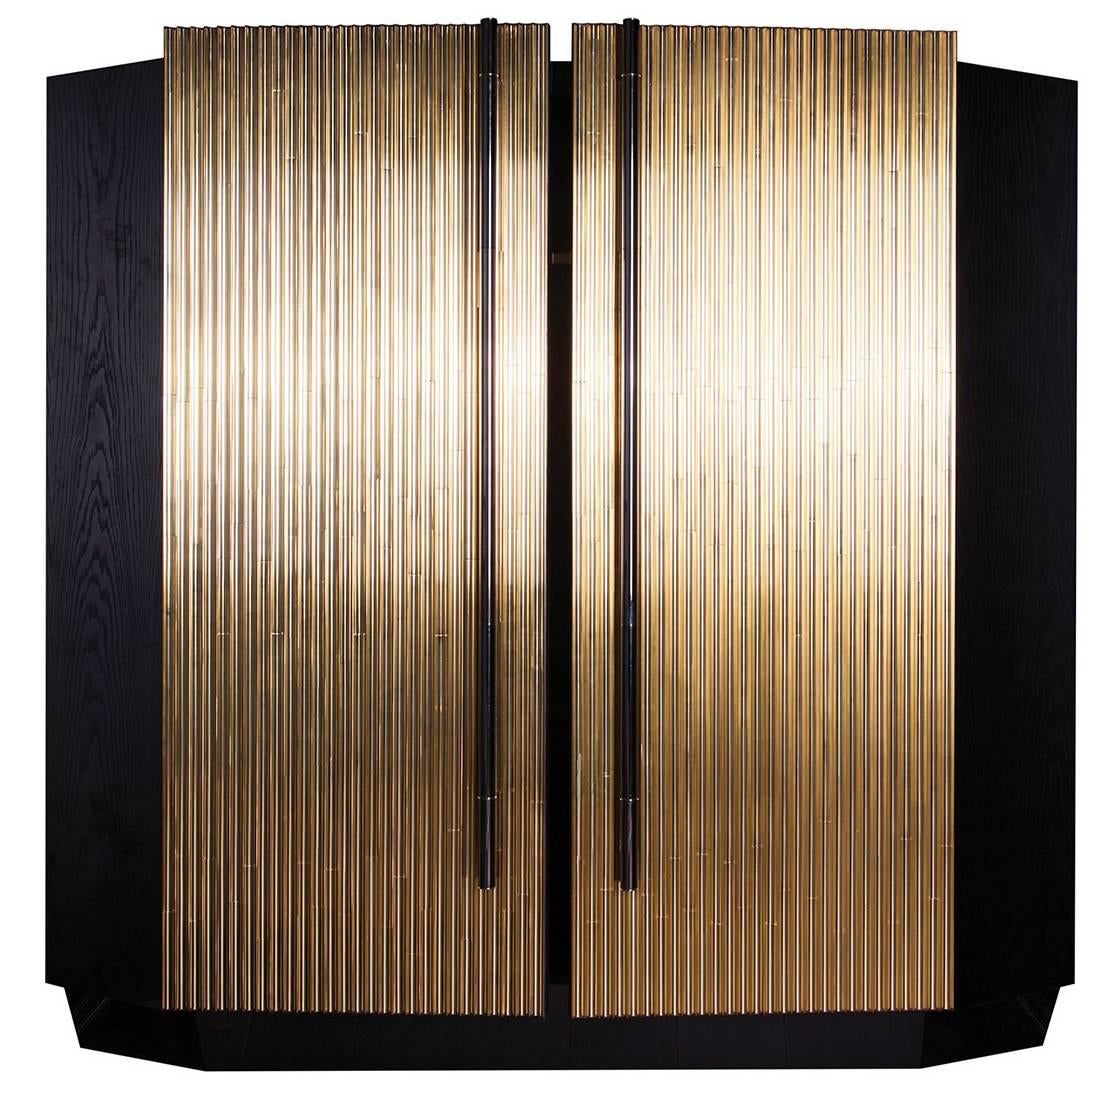 Black Chrome and Wood Trabo Cabinet with Hand-Polished Brass Details